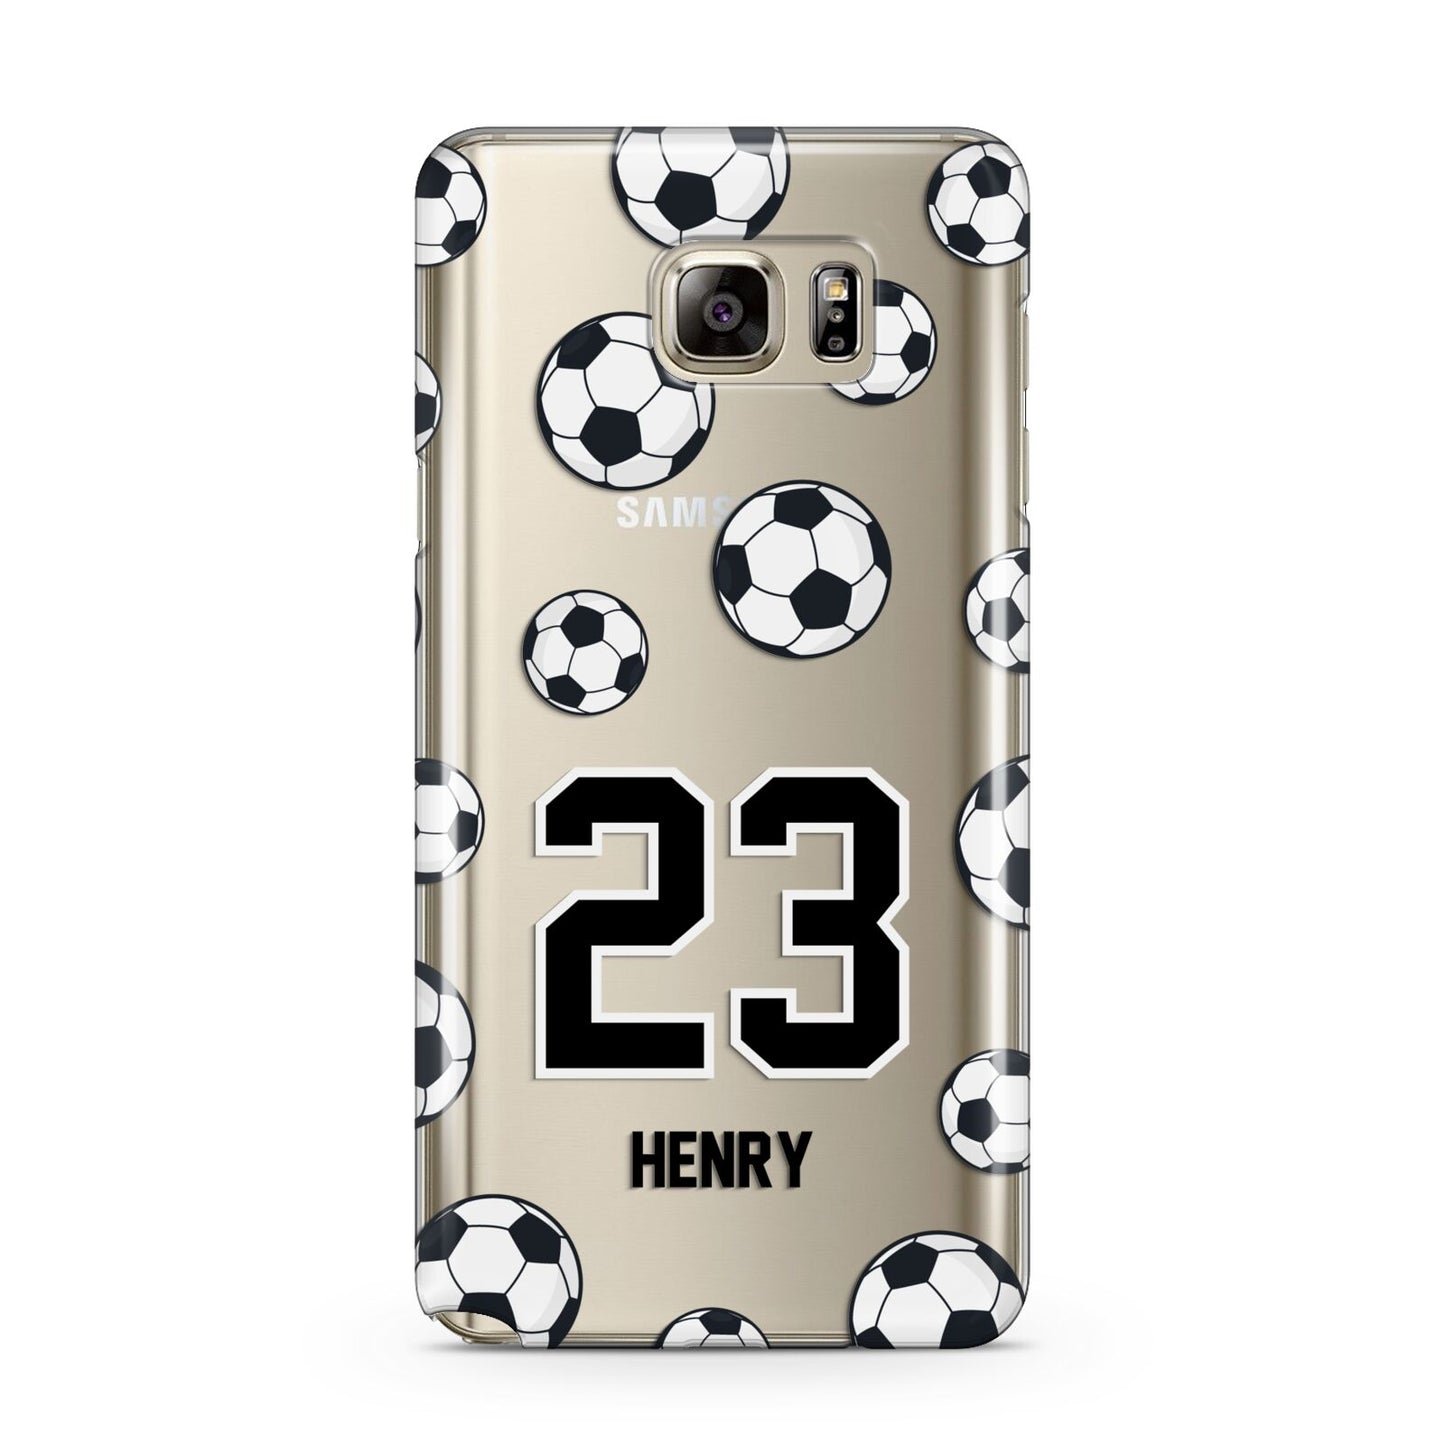 Personalised Football Samsung Galaxy Note 5 Case